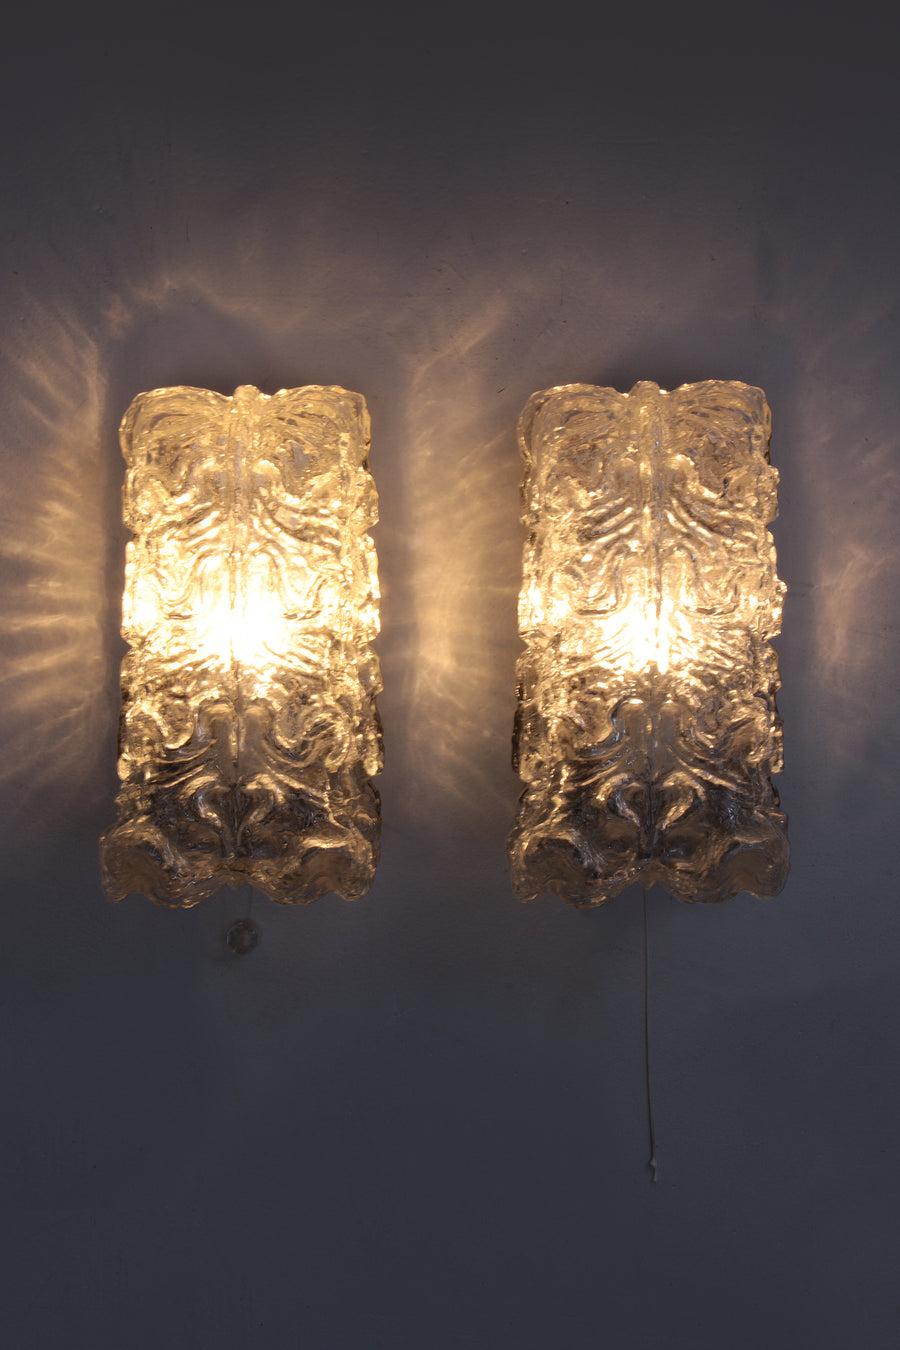 Pair of Glashutte Limburg Wall Lamps Made of Glass, 1960, Germany

Beautiful set of beautifully crafted glass when the lamp is lit you get a nice warm appearance.

The lights are made by Glashutte Limburg, Germany.

Glashütte Limburg Three months